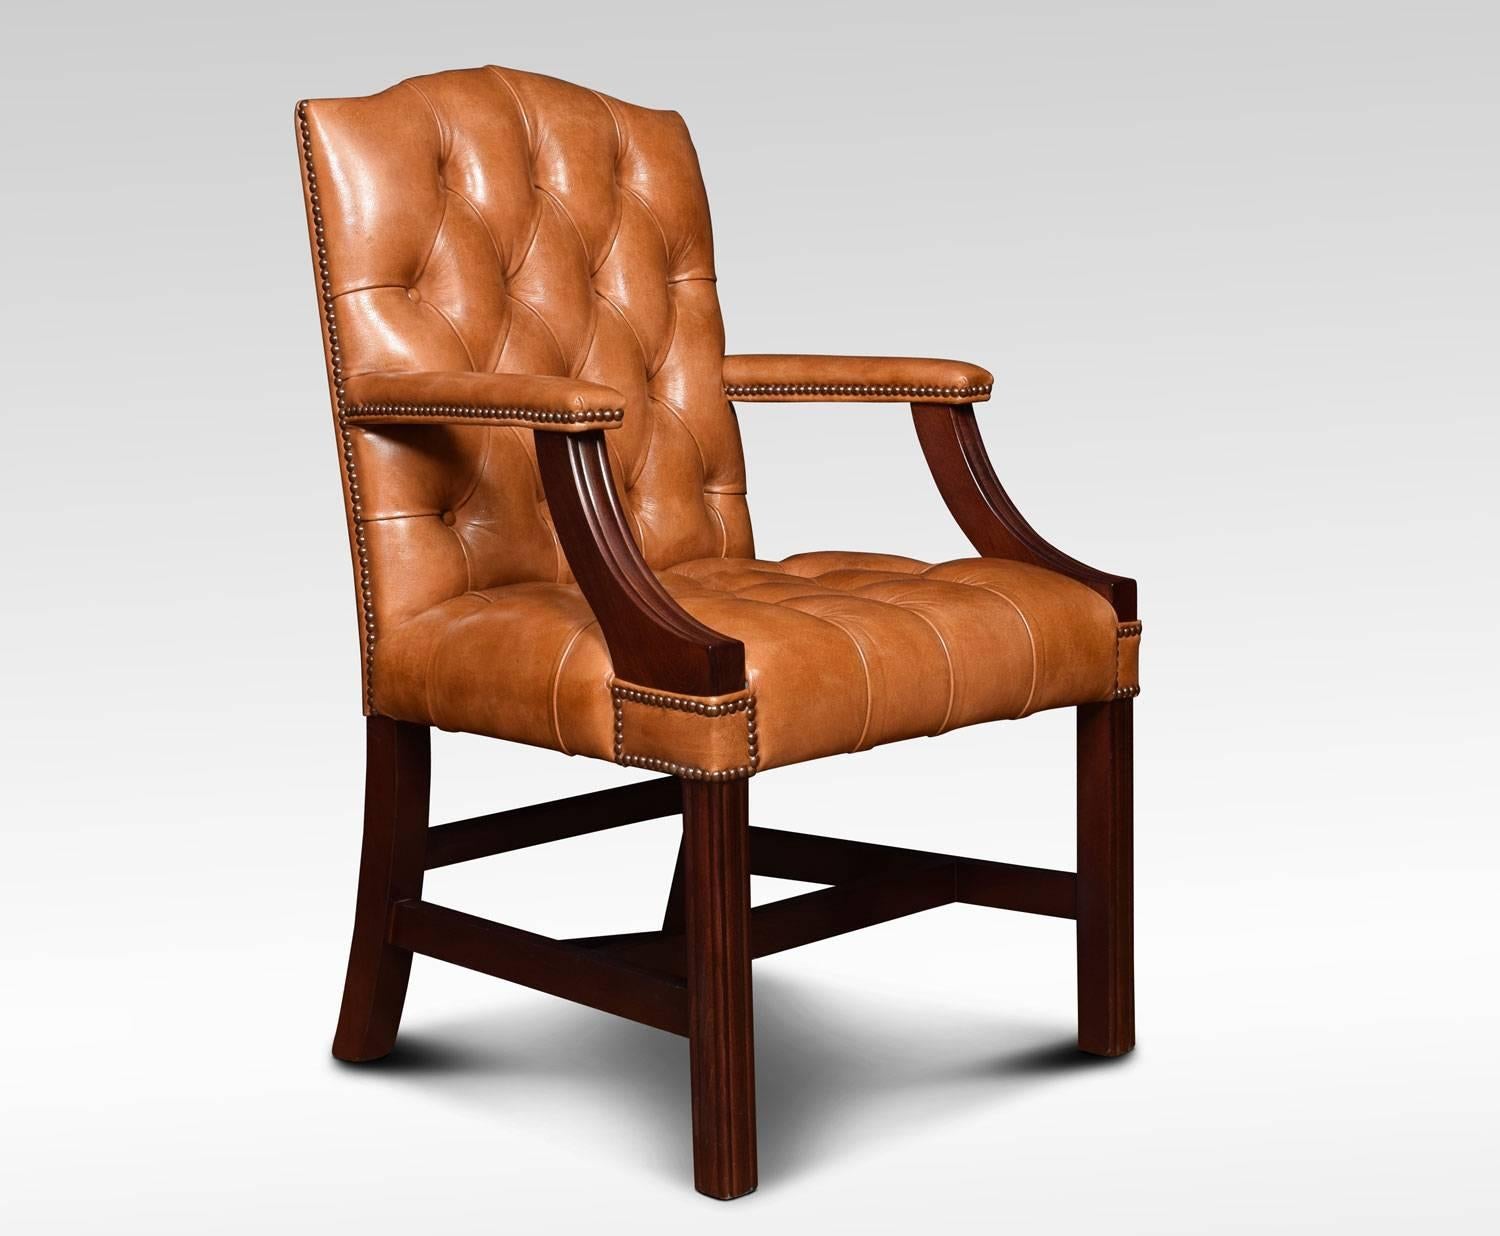 Pair of Georgian style leather Gainsborough library chairs, having deep buttoned brown leather backs and seats with brass studded edges. The solid mahogany framed standing on square legs, united by stretcher.
Dimensions:
Height 39.5 inches, height